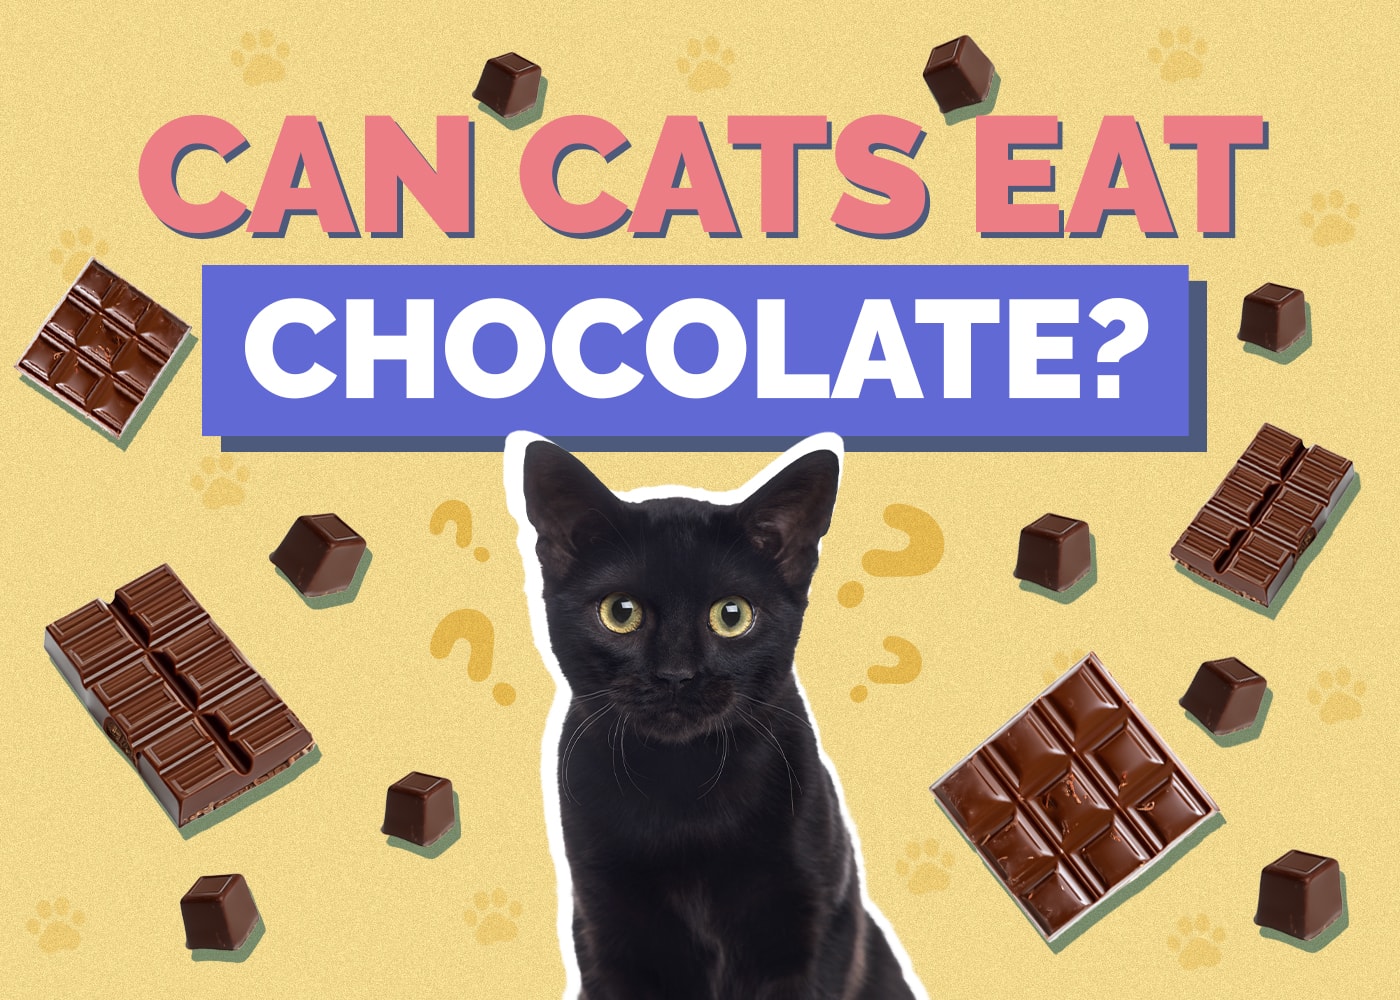 Can Cats Eat chocolate